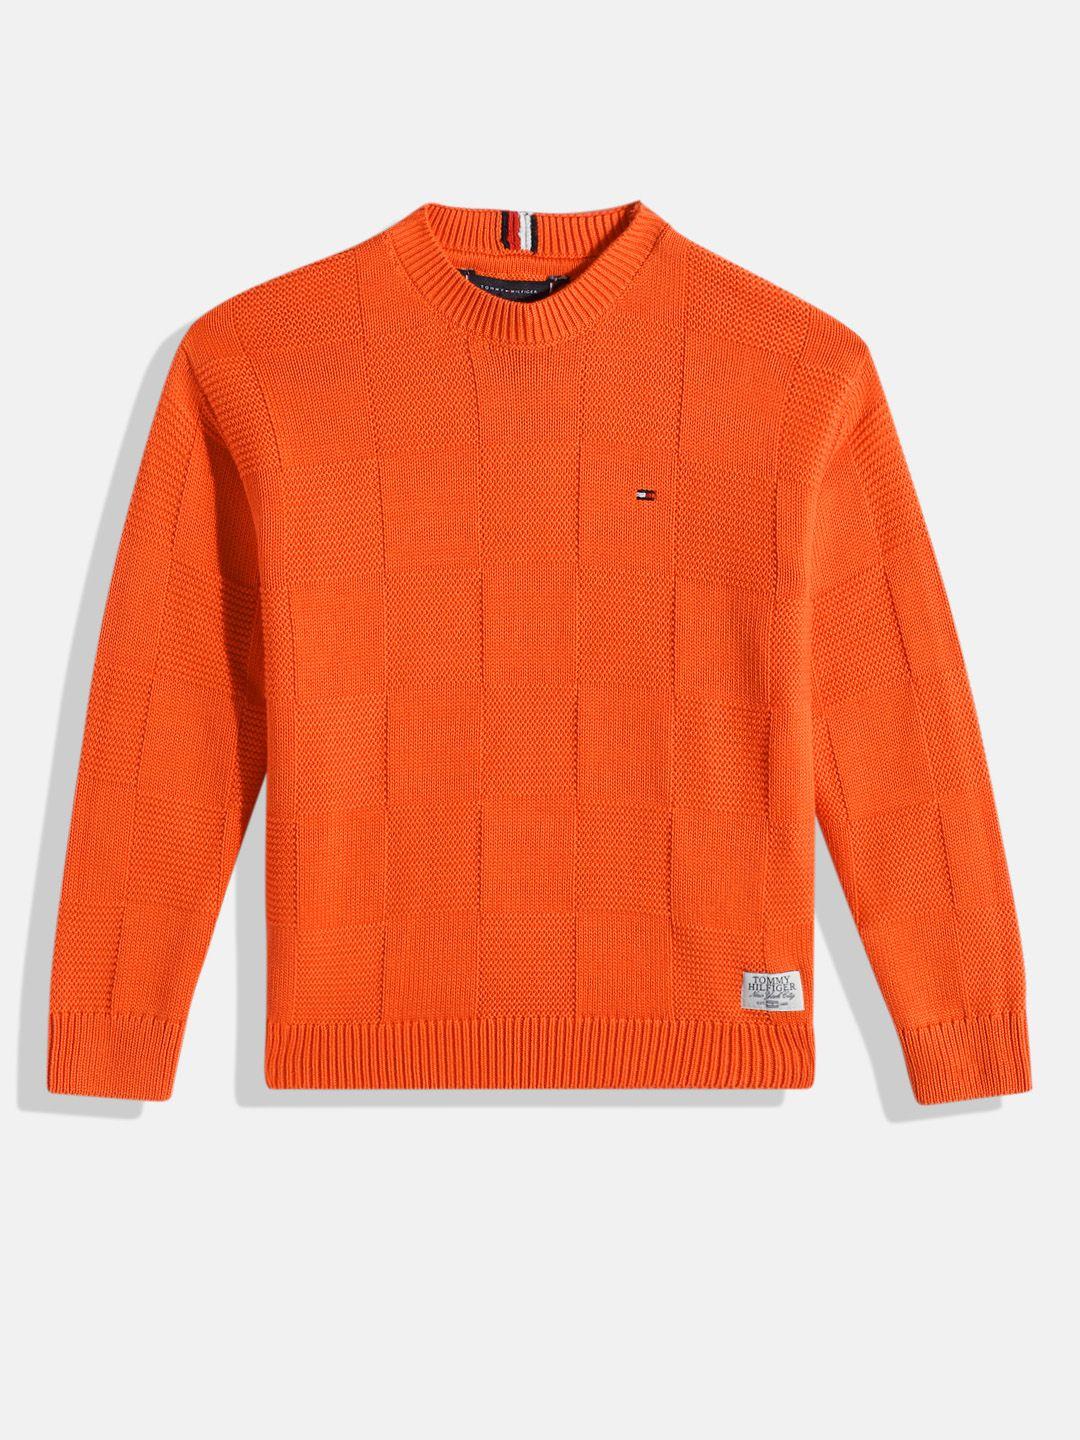 tommy-hilfiger-boys-orange-geometric-self-design-knitted-pure-cotton-pullover